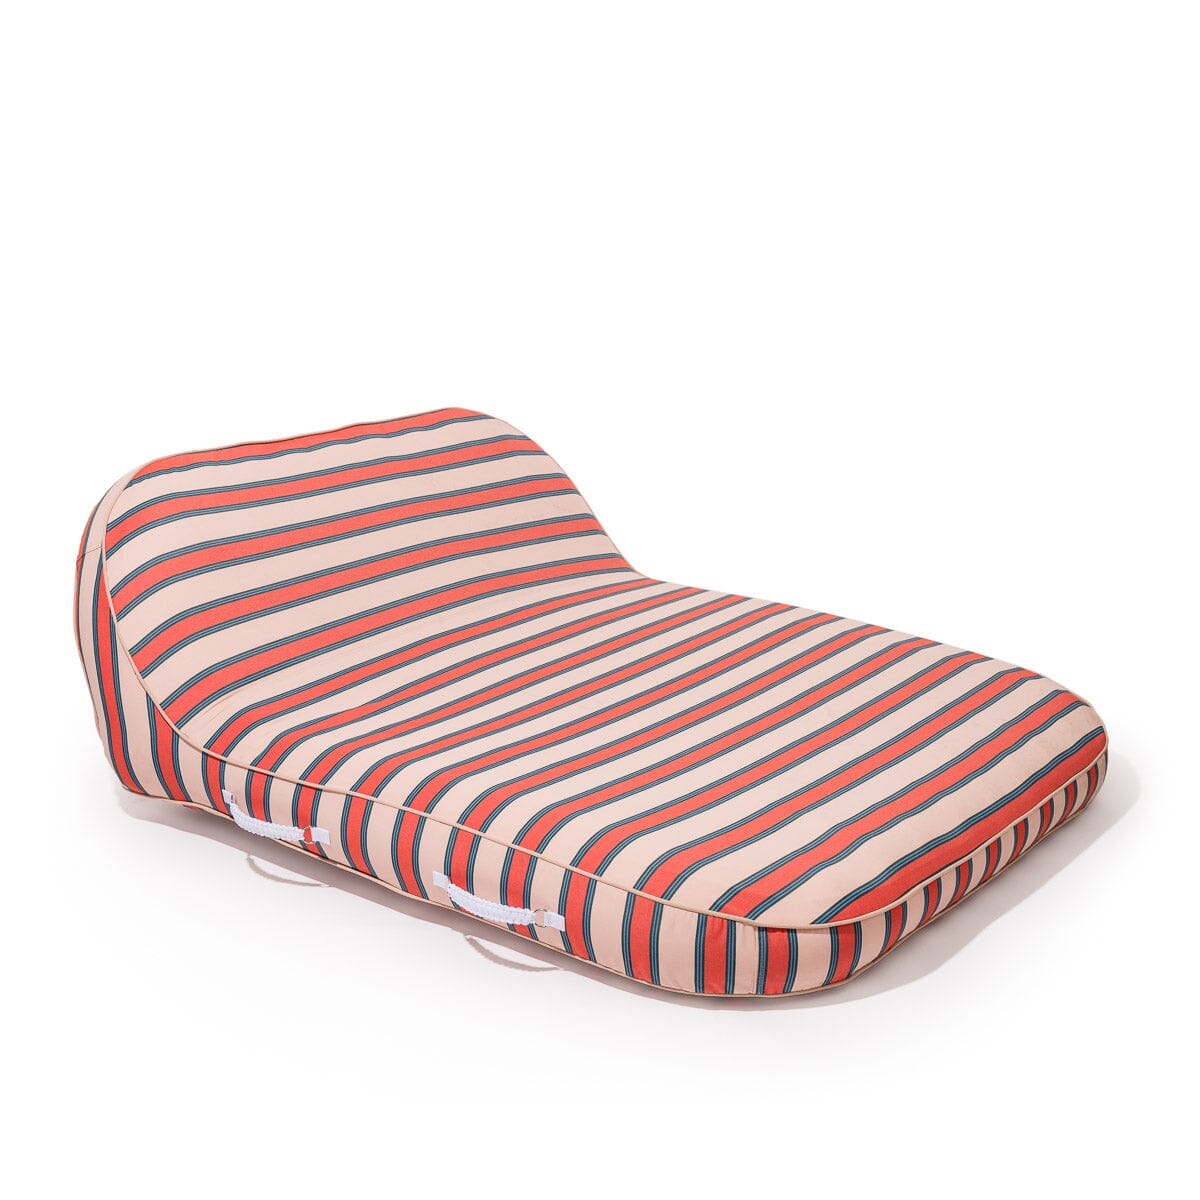 The XL Pool Lounger - Bistro Dusty Pink Stripe Pool Lounger Business & Pleasure Co Aus 